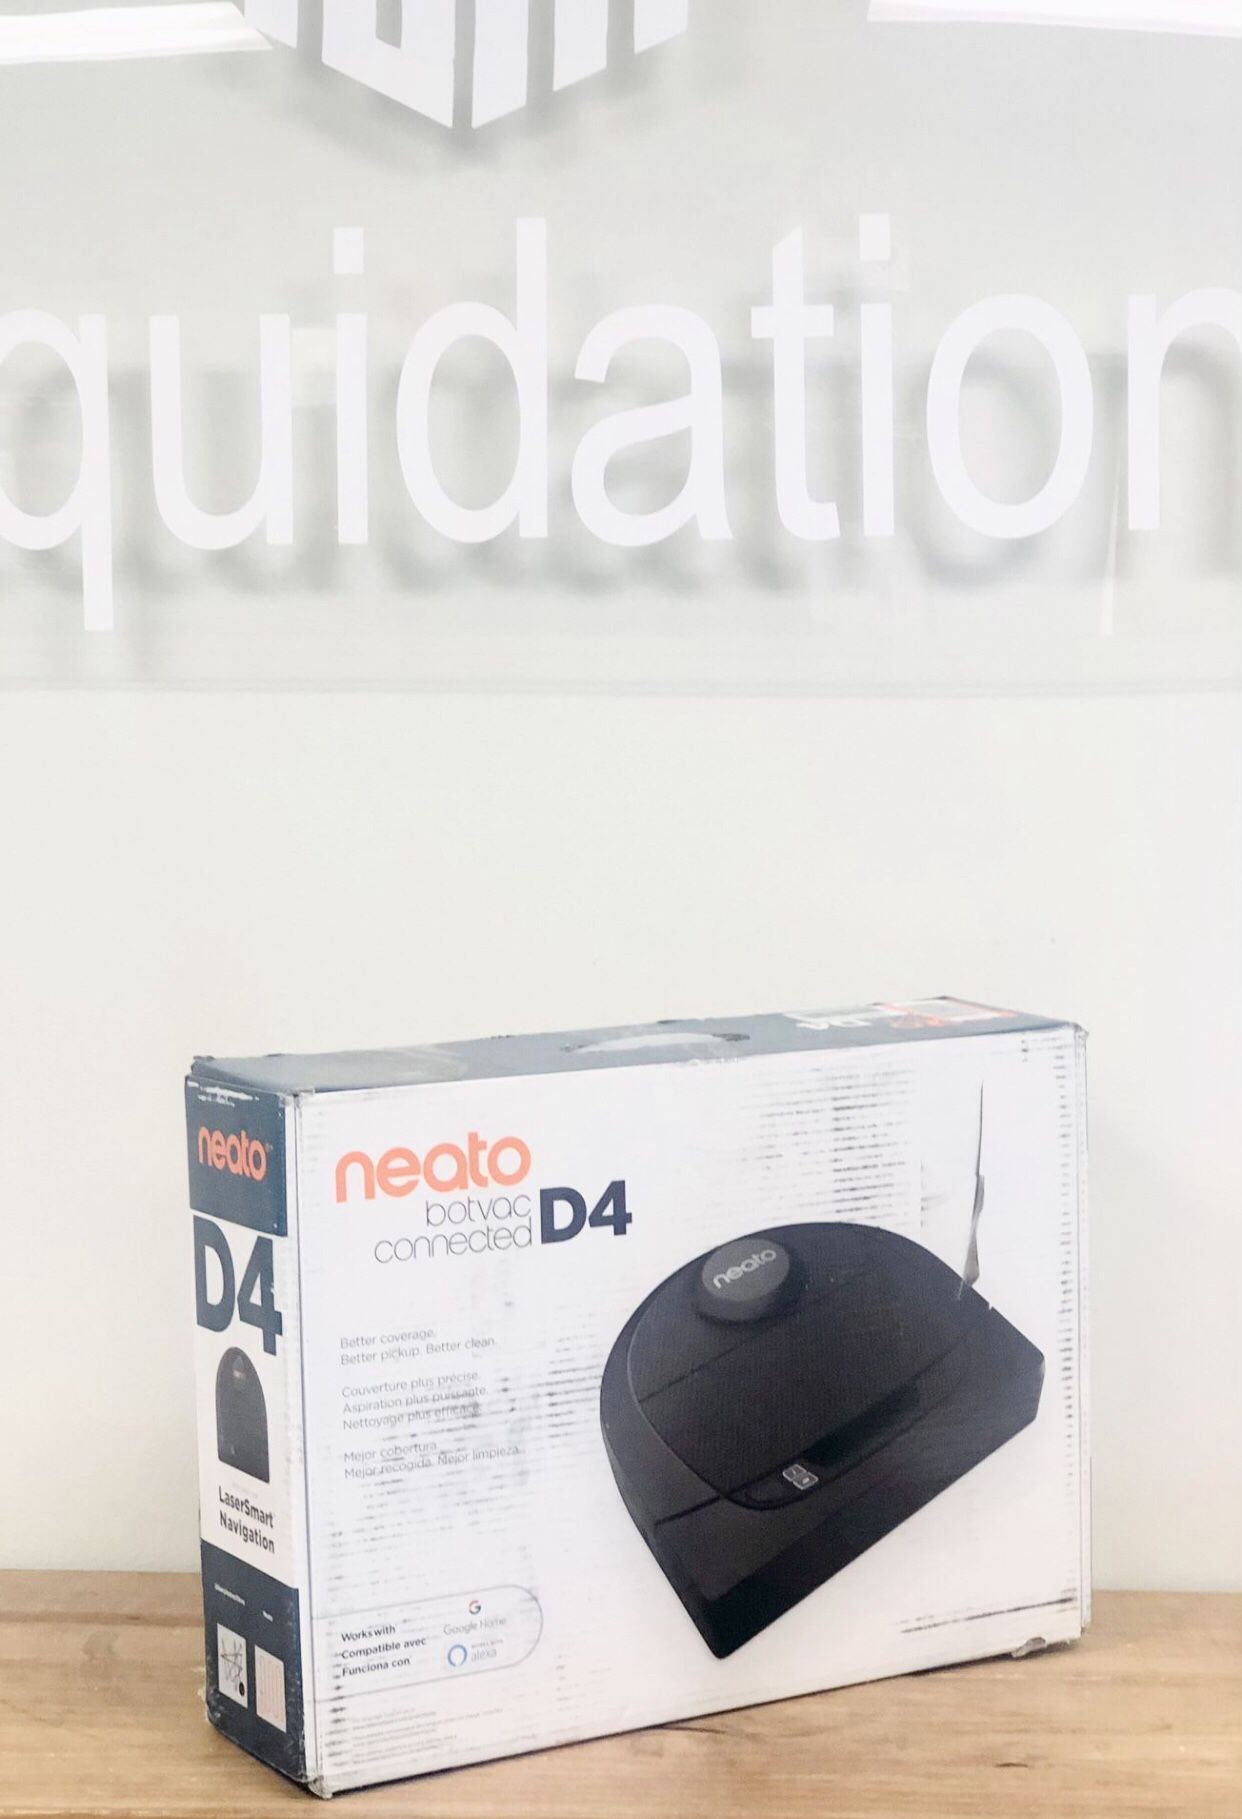 Neato Robotics D4 Laser Guided Smart Robot Vacuum - Wi-Fi Connected, Ideal for Carpets, Hard Floors and Pet Hair